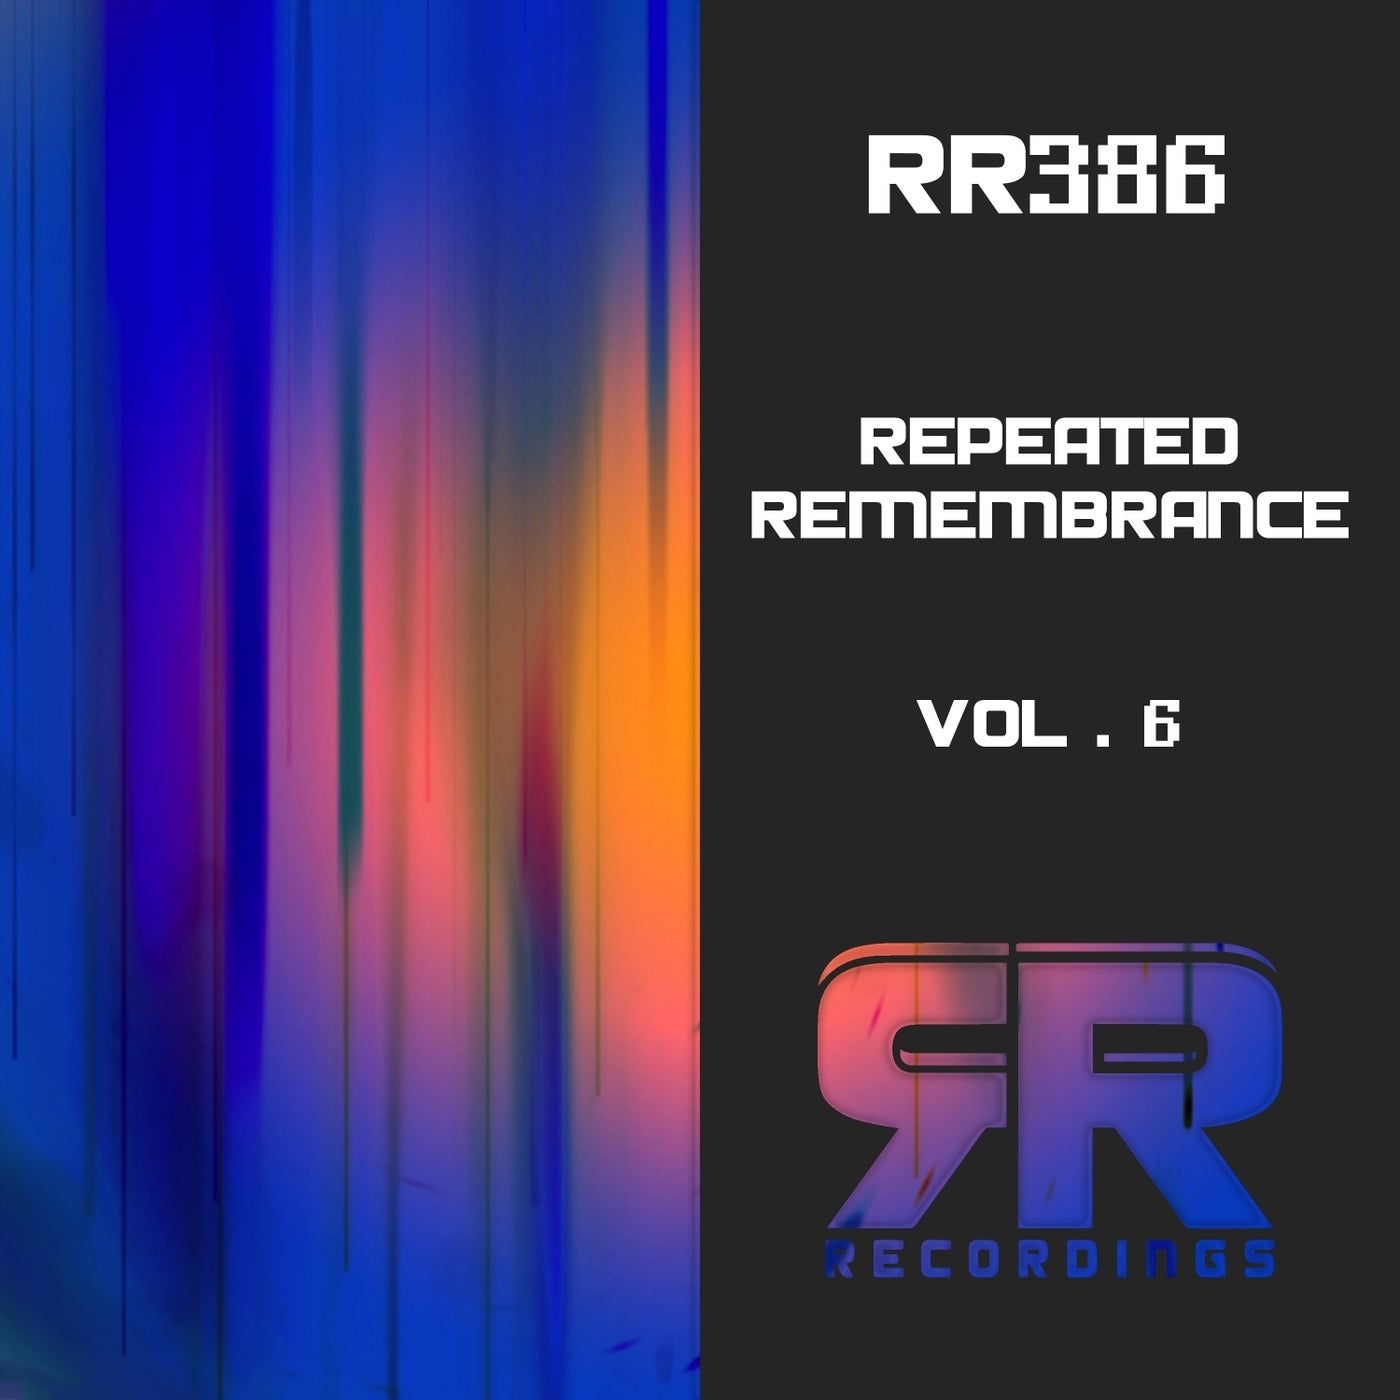 Repeated Remembrance, Vol. 6